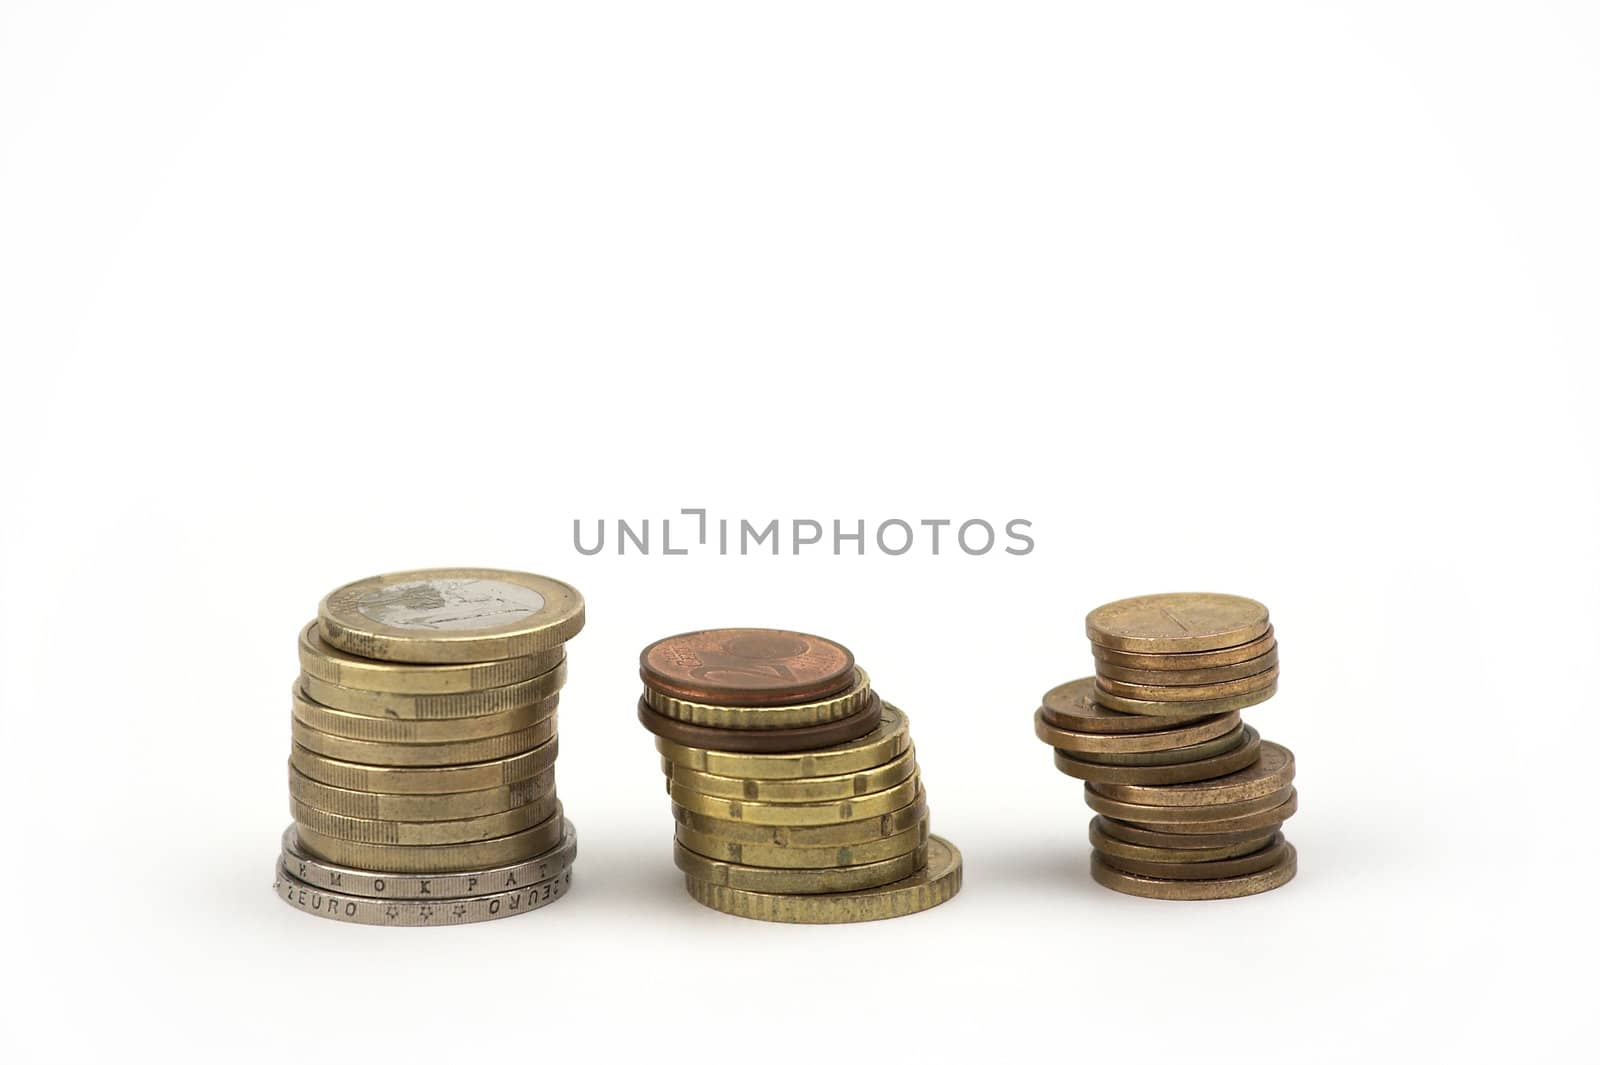  coins by alexkosev